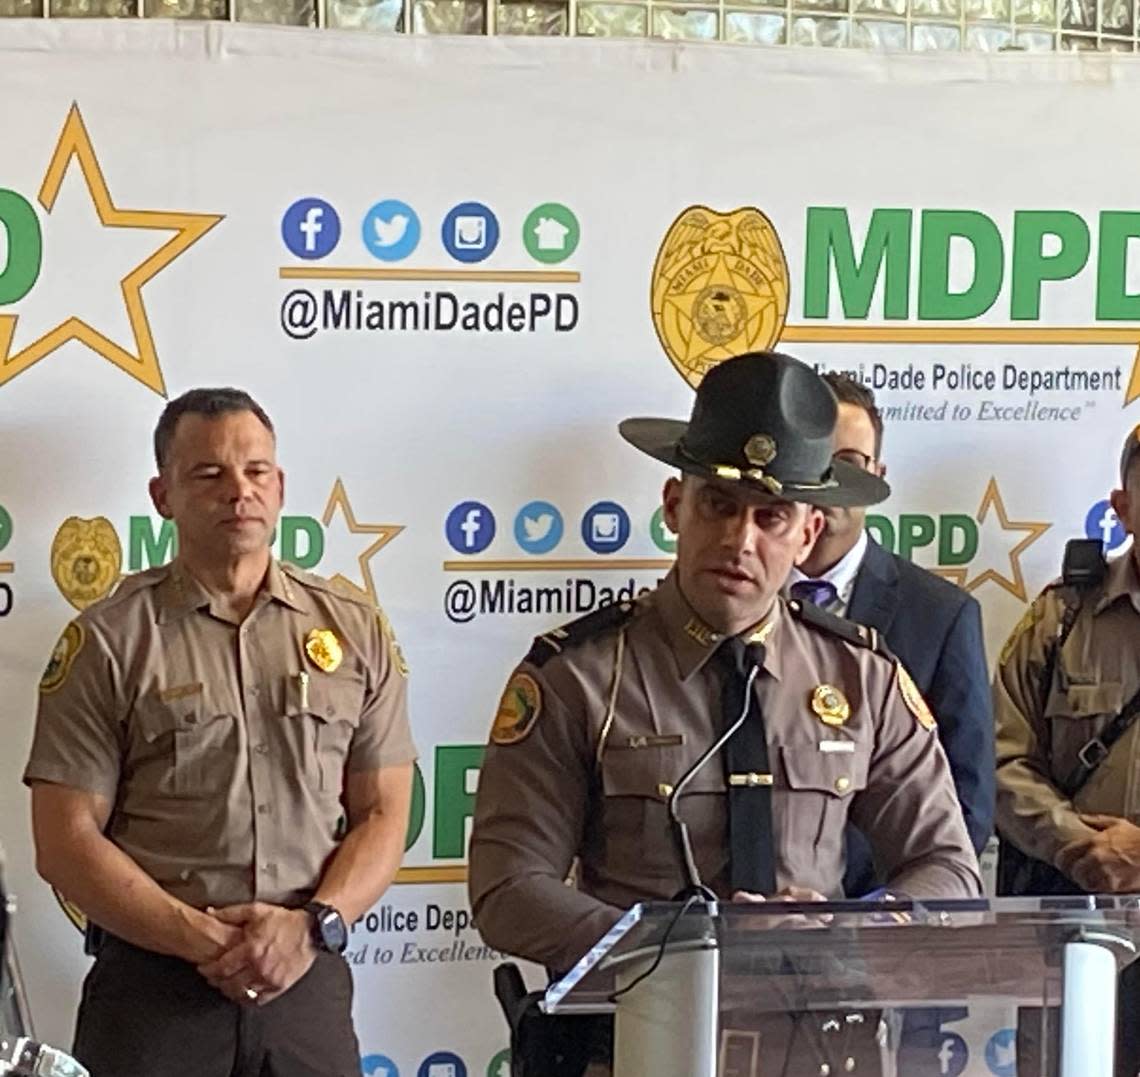 Florida Highway Patrol Lt. Alejandro Camacho speaks to reporters from Miami-Dade County Police Department’s headquarters in Doral Friday, Jan. 13, 2022, about an increased law enforcement presence to patrol for reckless ATV, dirt bike and motorcycle riders over the Martin Luther King Jr. holiday weekend.